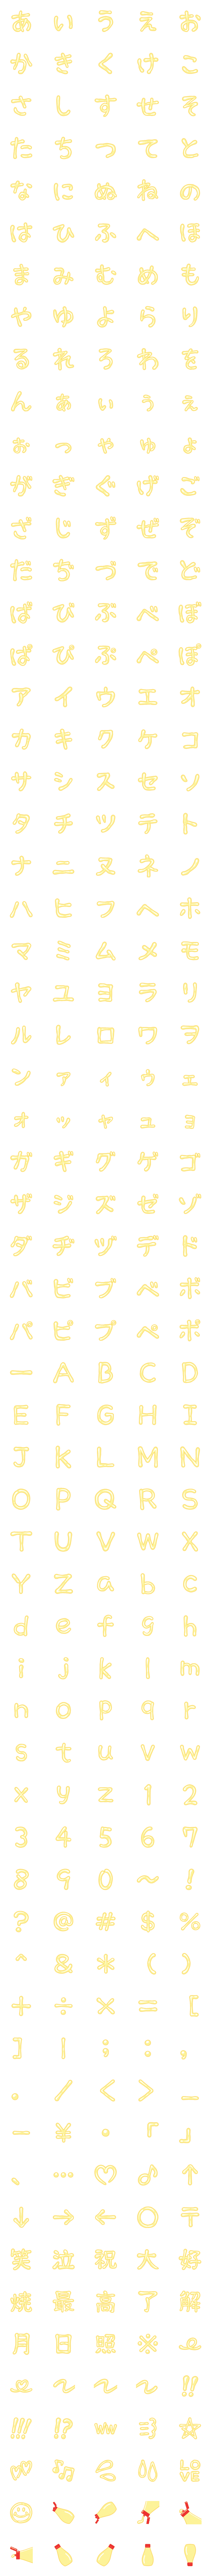 [LINE絵文字]☆マヨネーズ文字☆の画像一覧